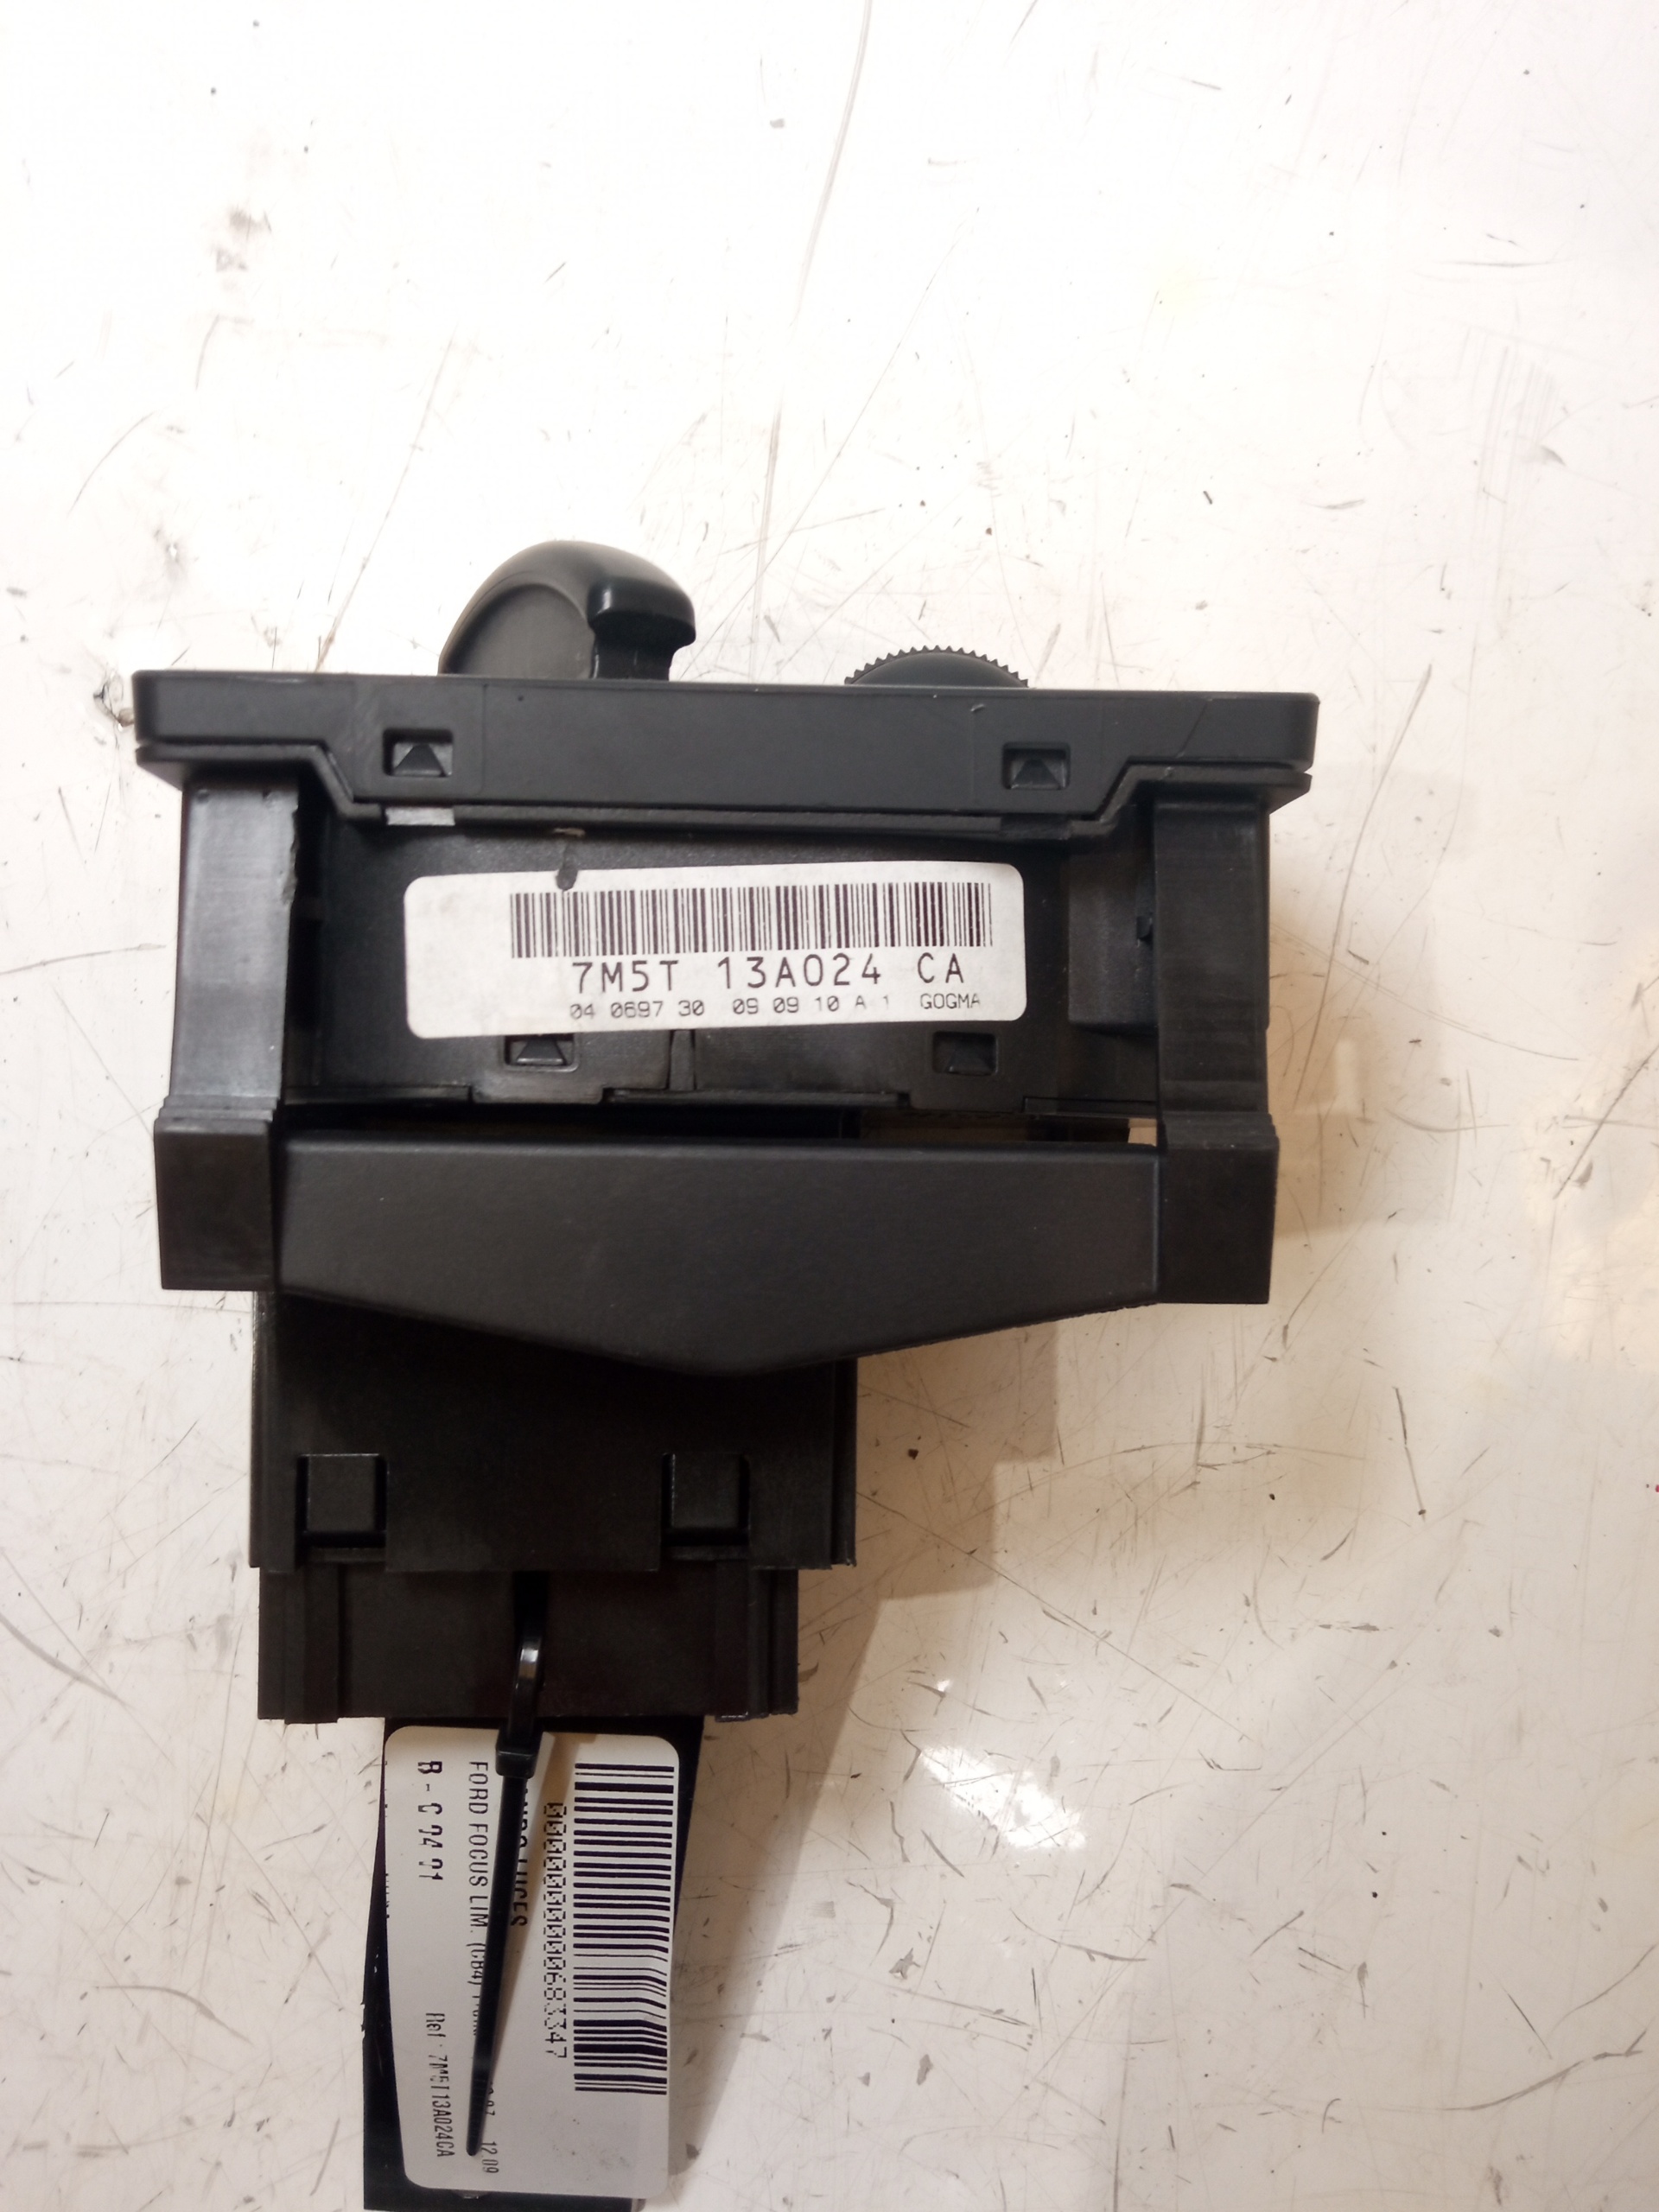 FORD Focus 2 generation (2004-2011) Headlight Switch Control Unit 7M5T13A024CA, 16PINES 25211292